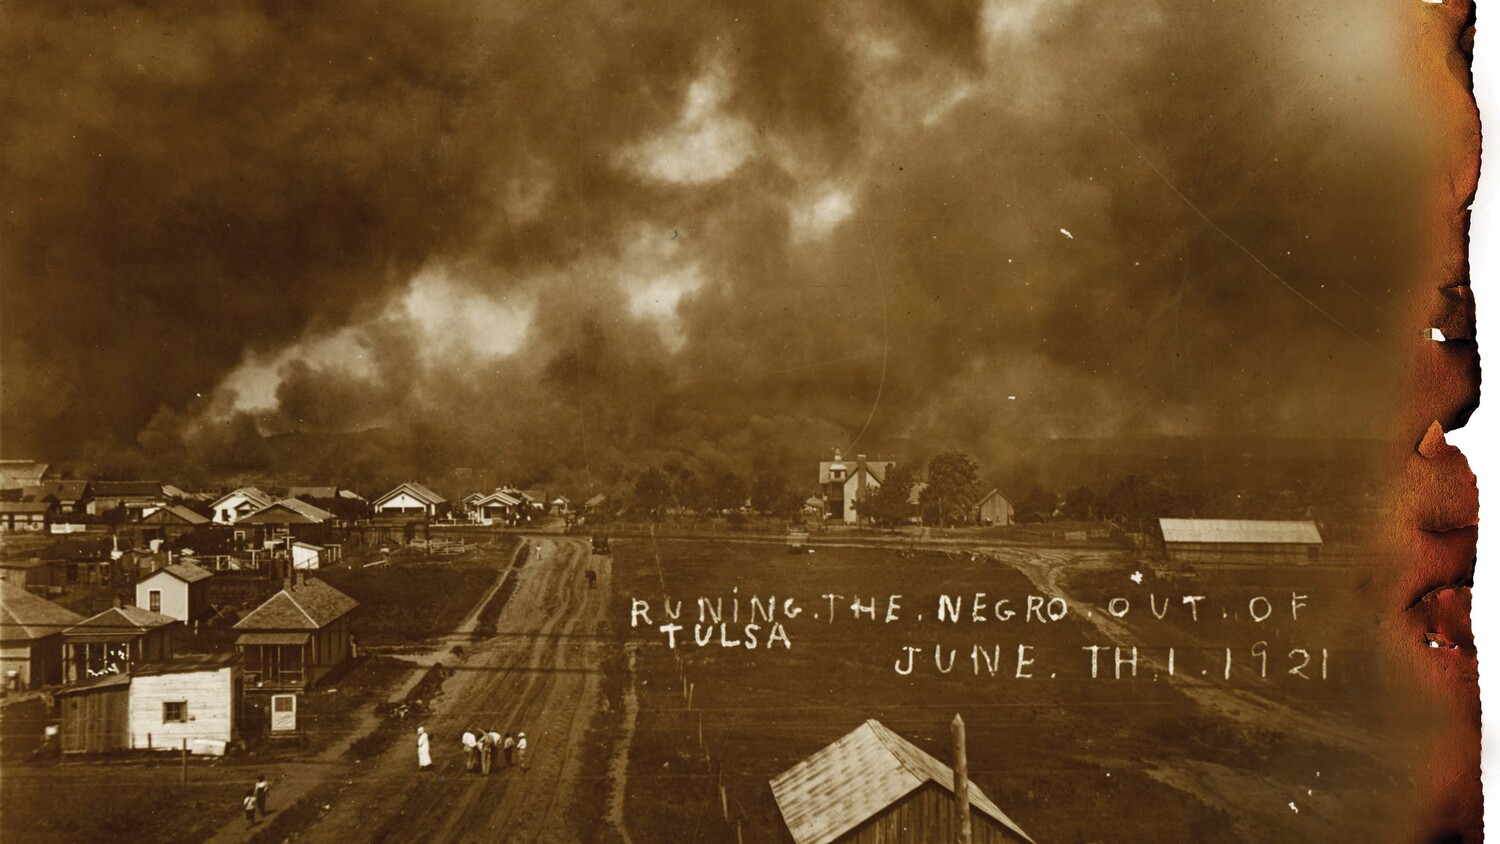 Lessons From the Tulsa Race Massacre